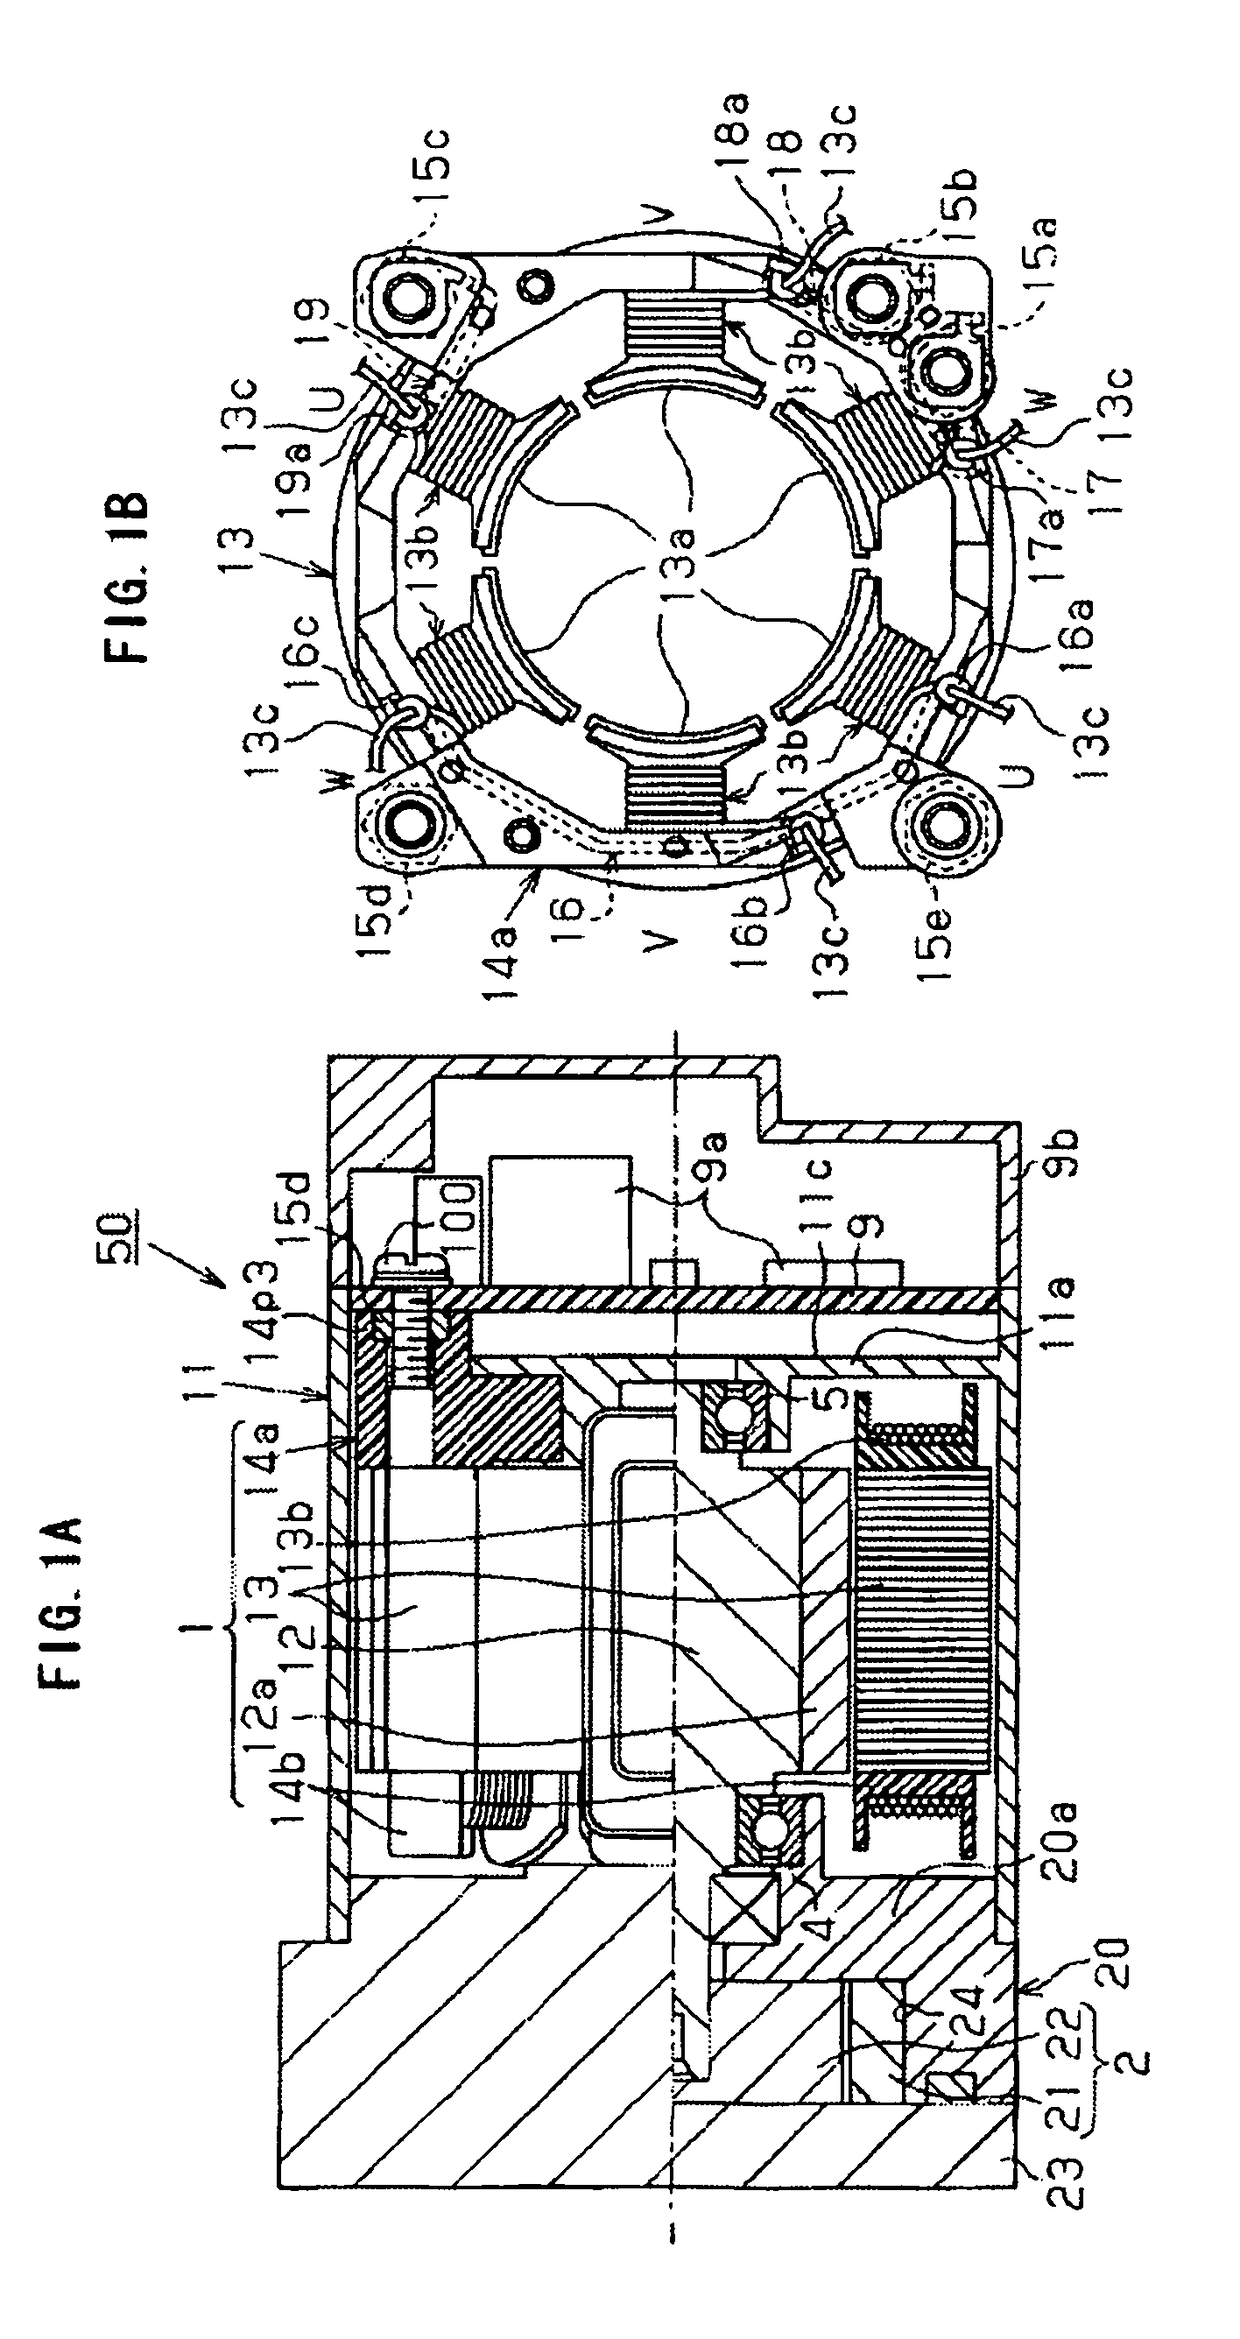 Electric motor and electric pump unit with busbars integrally formed with driving circuit connecting terminals